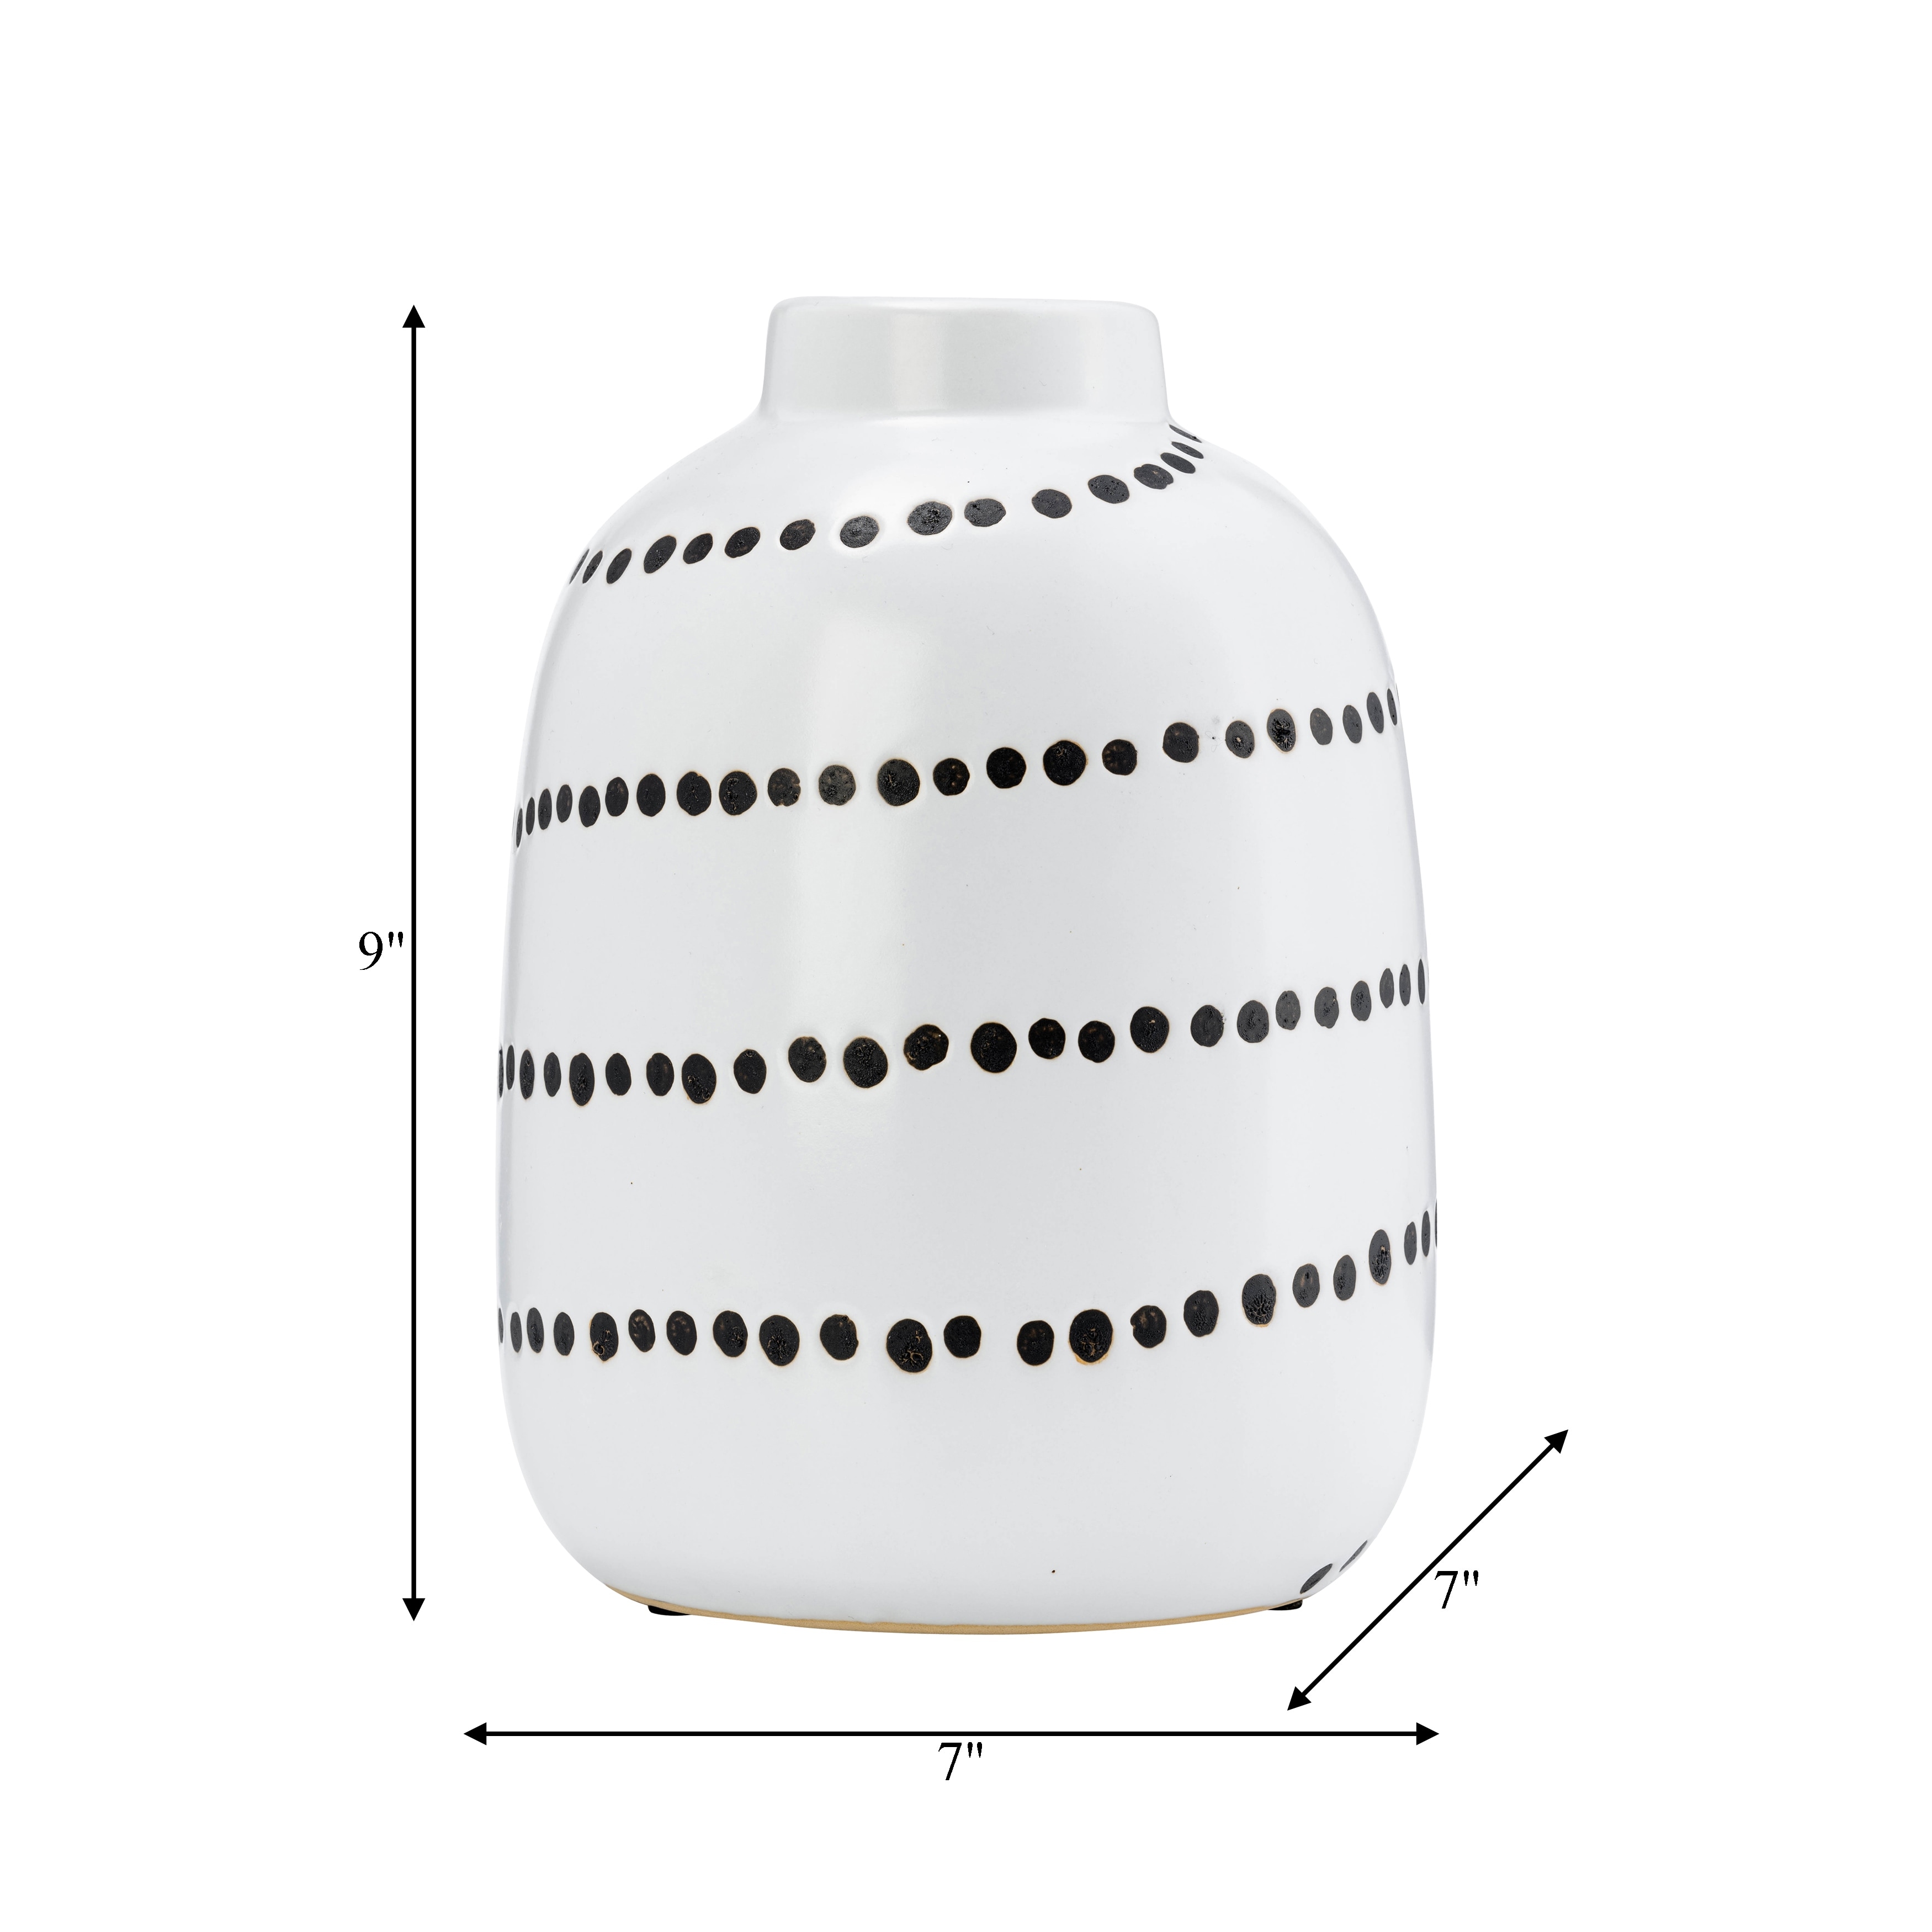 9" Ceramic Vase Contemporary Abstract Black and White Spiral Dot Flower Vase Decorative Table Accent for Home or